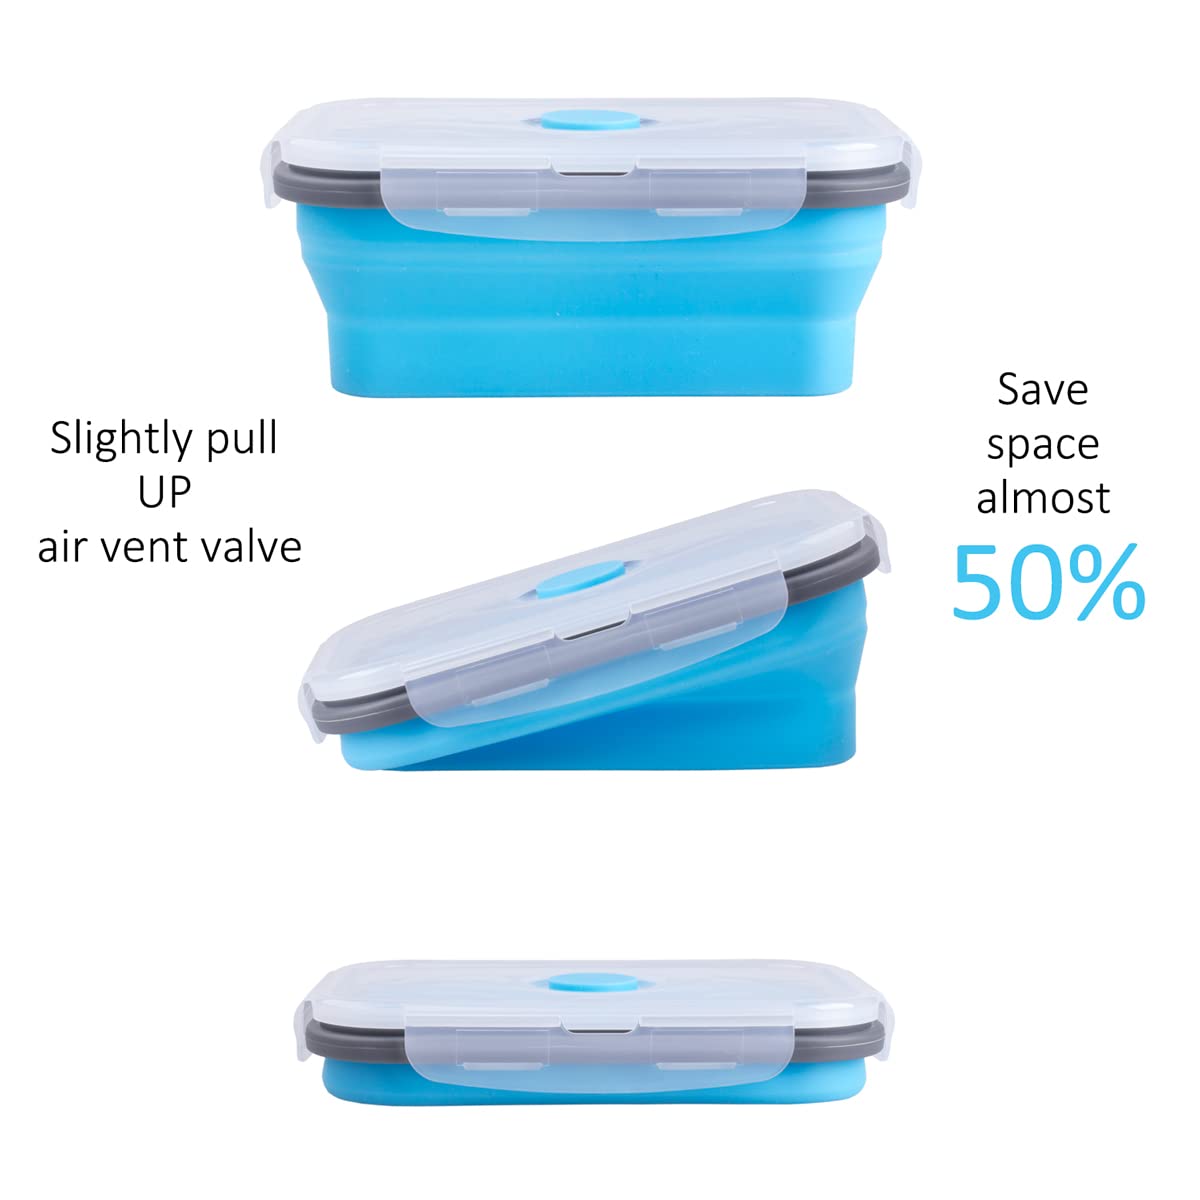 Annaklin Collapsible Food Storage Containers with Lid, Bundle of 3 Sizes, 12 Pack, Kitchen Stacking Silicone Collapsible Meal Prep Container Set for Leftover, Microwave Freezer Dishwasher Safe, Blue